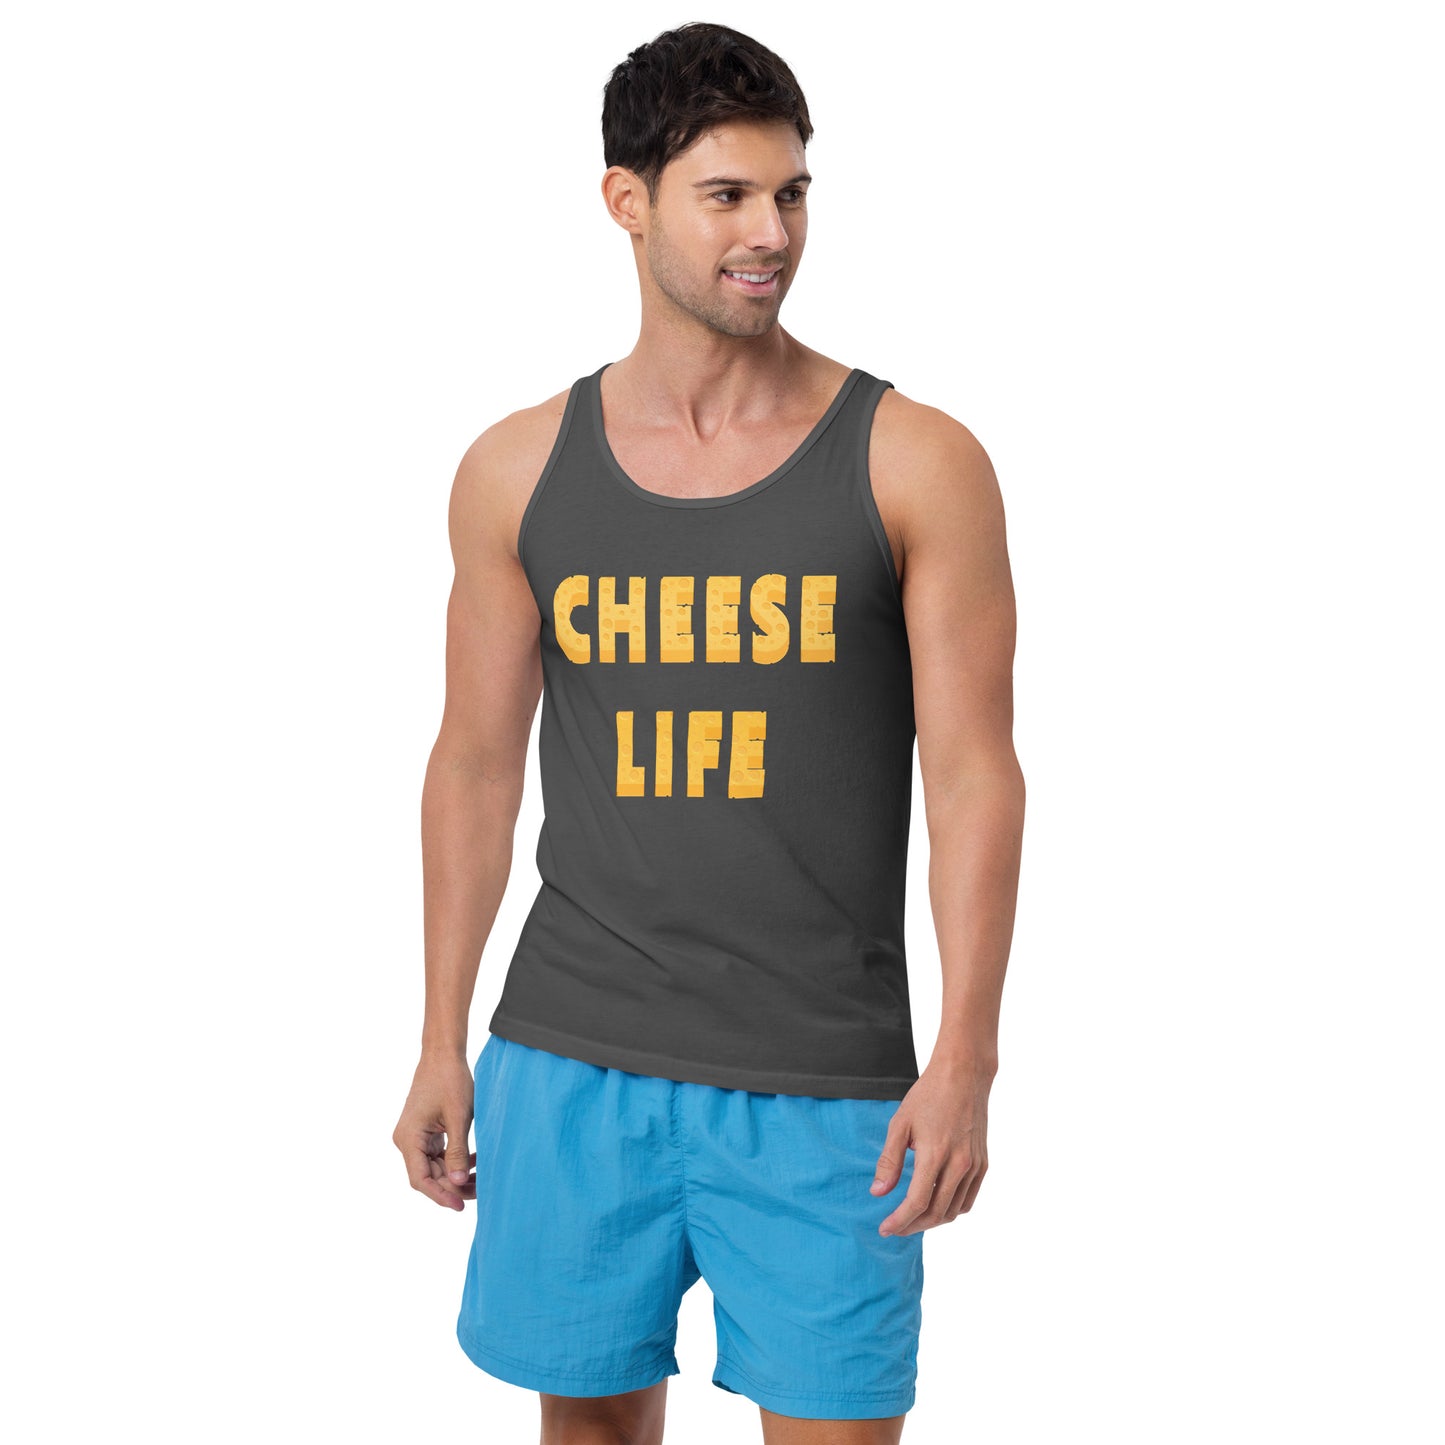 Mens Cheese Life Classic Tank Top